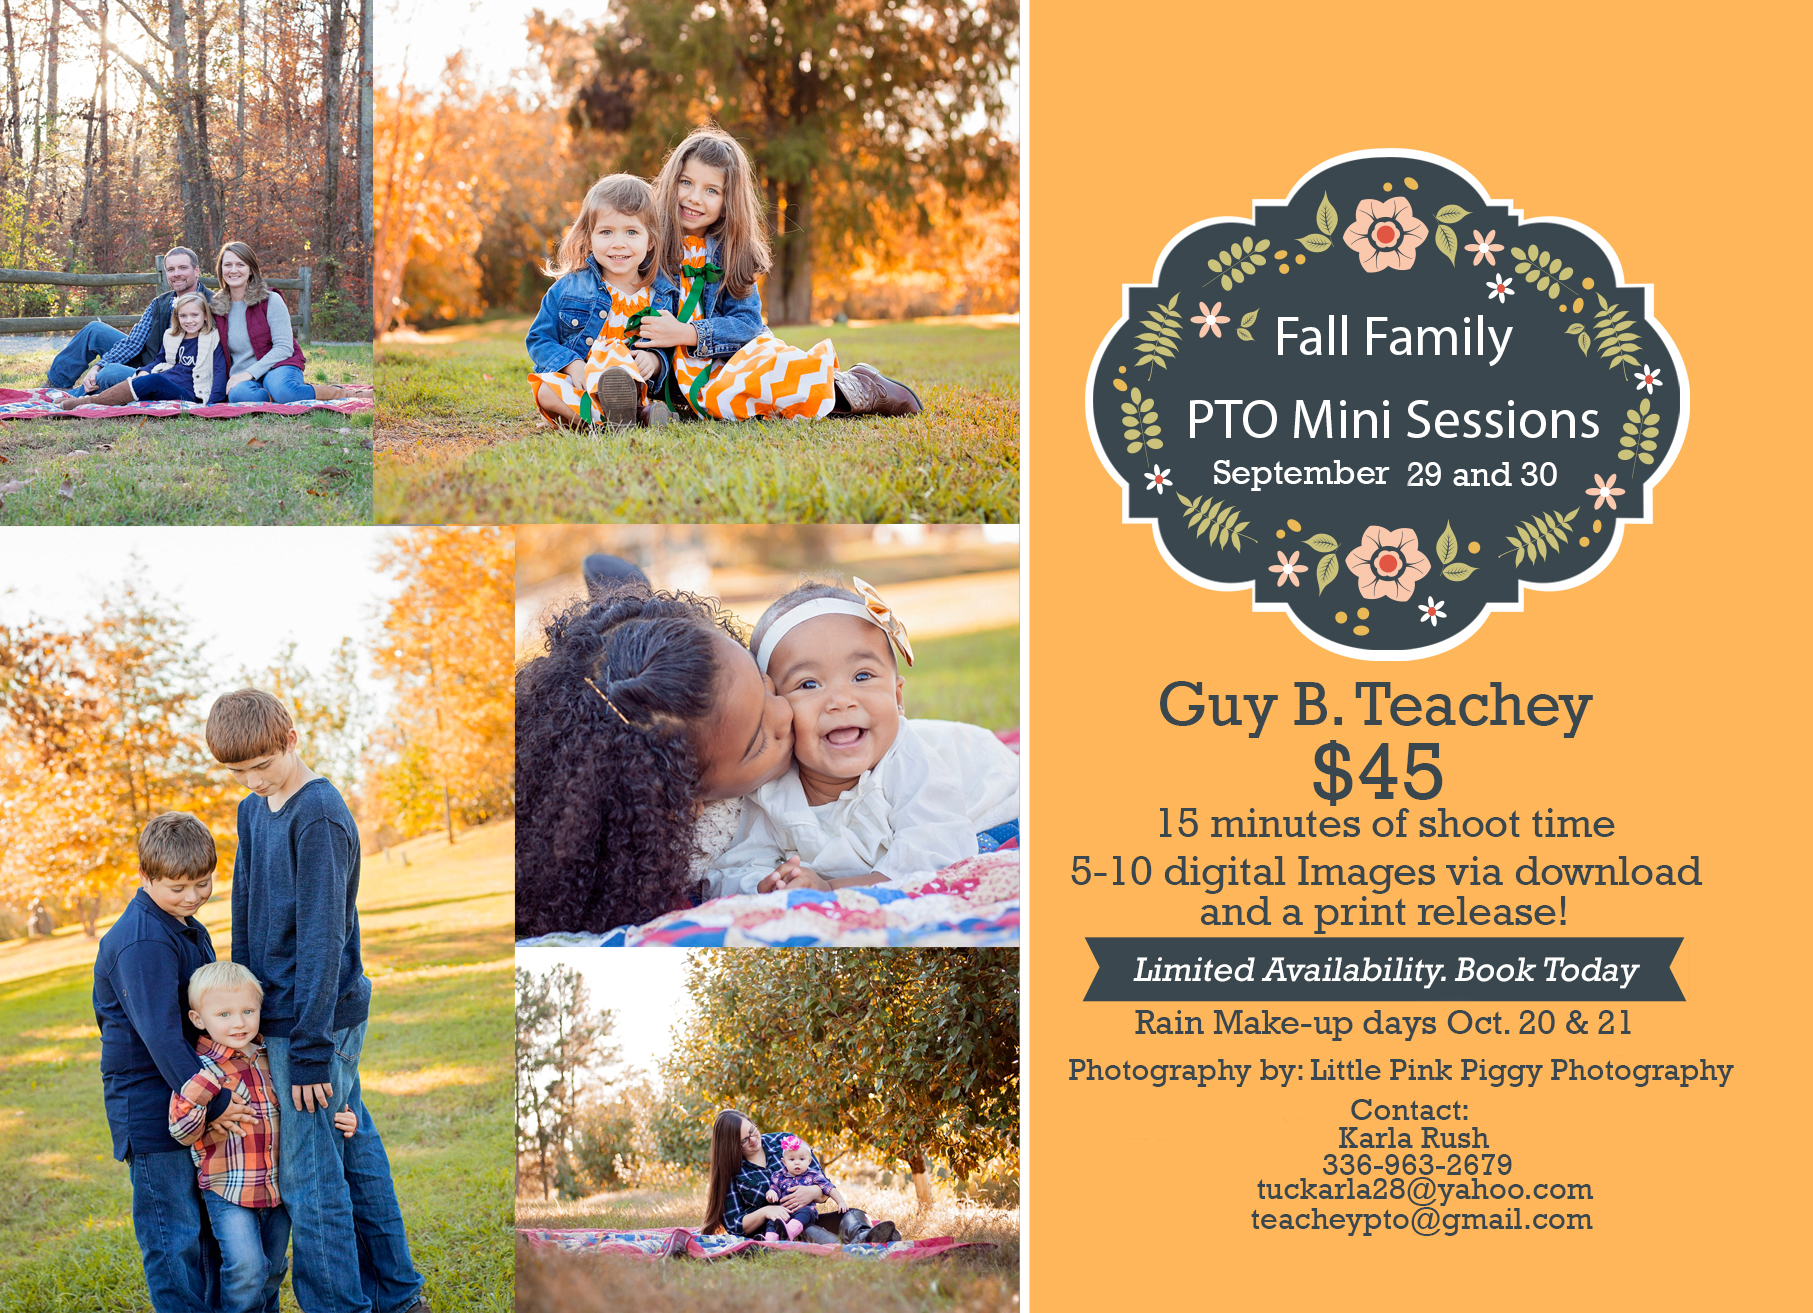 Sign up today for PTO Family Photos!